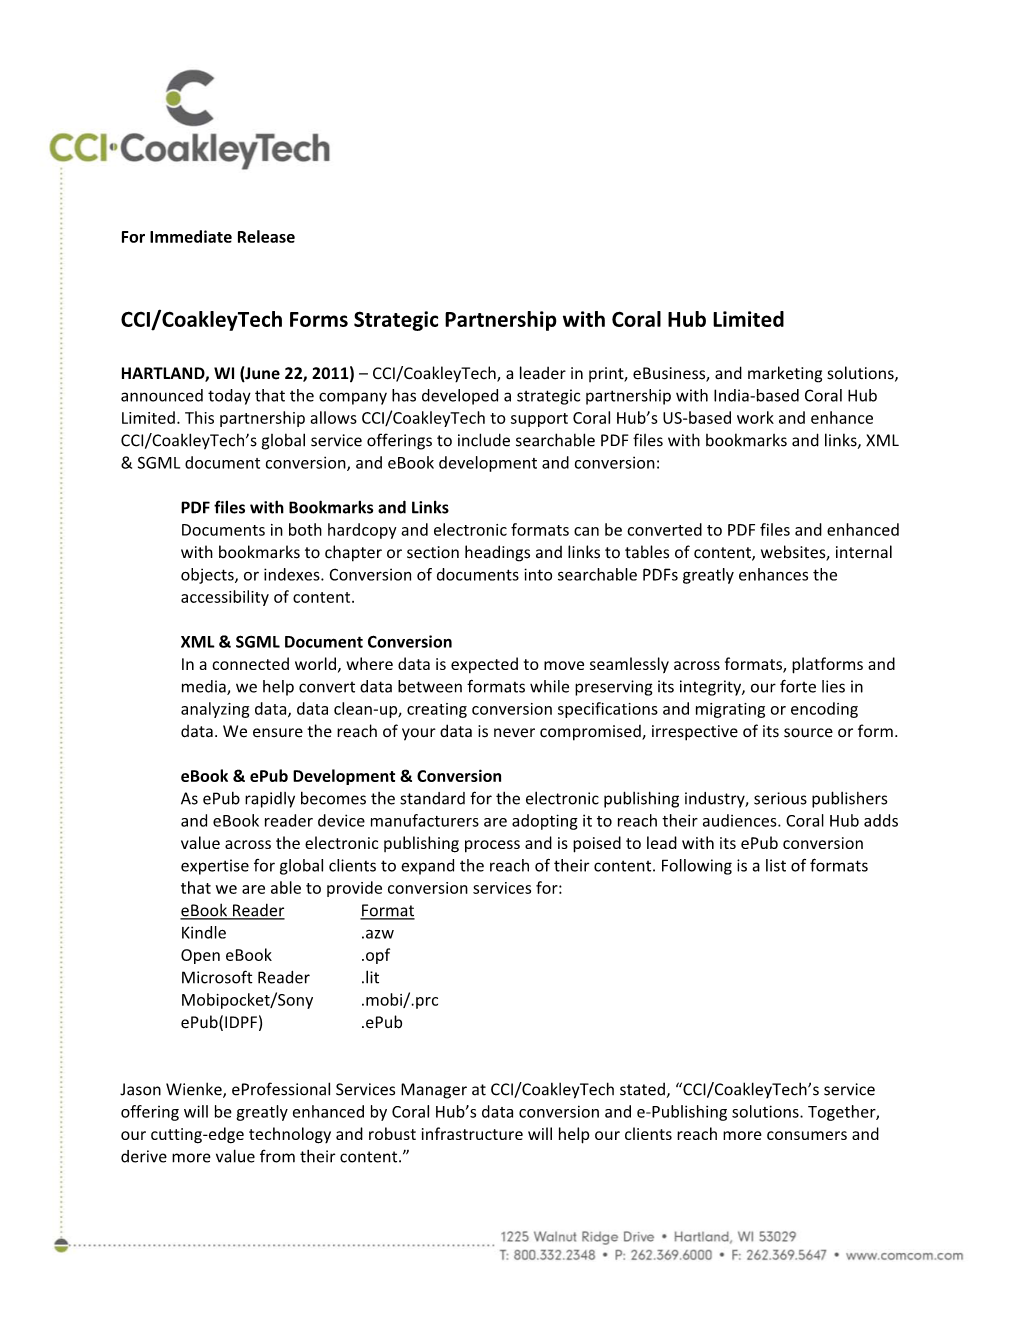 CCI/Coakleytech Forms Strategic Partnership with Coral Hub Limited